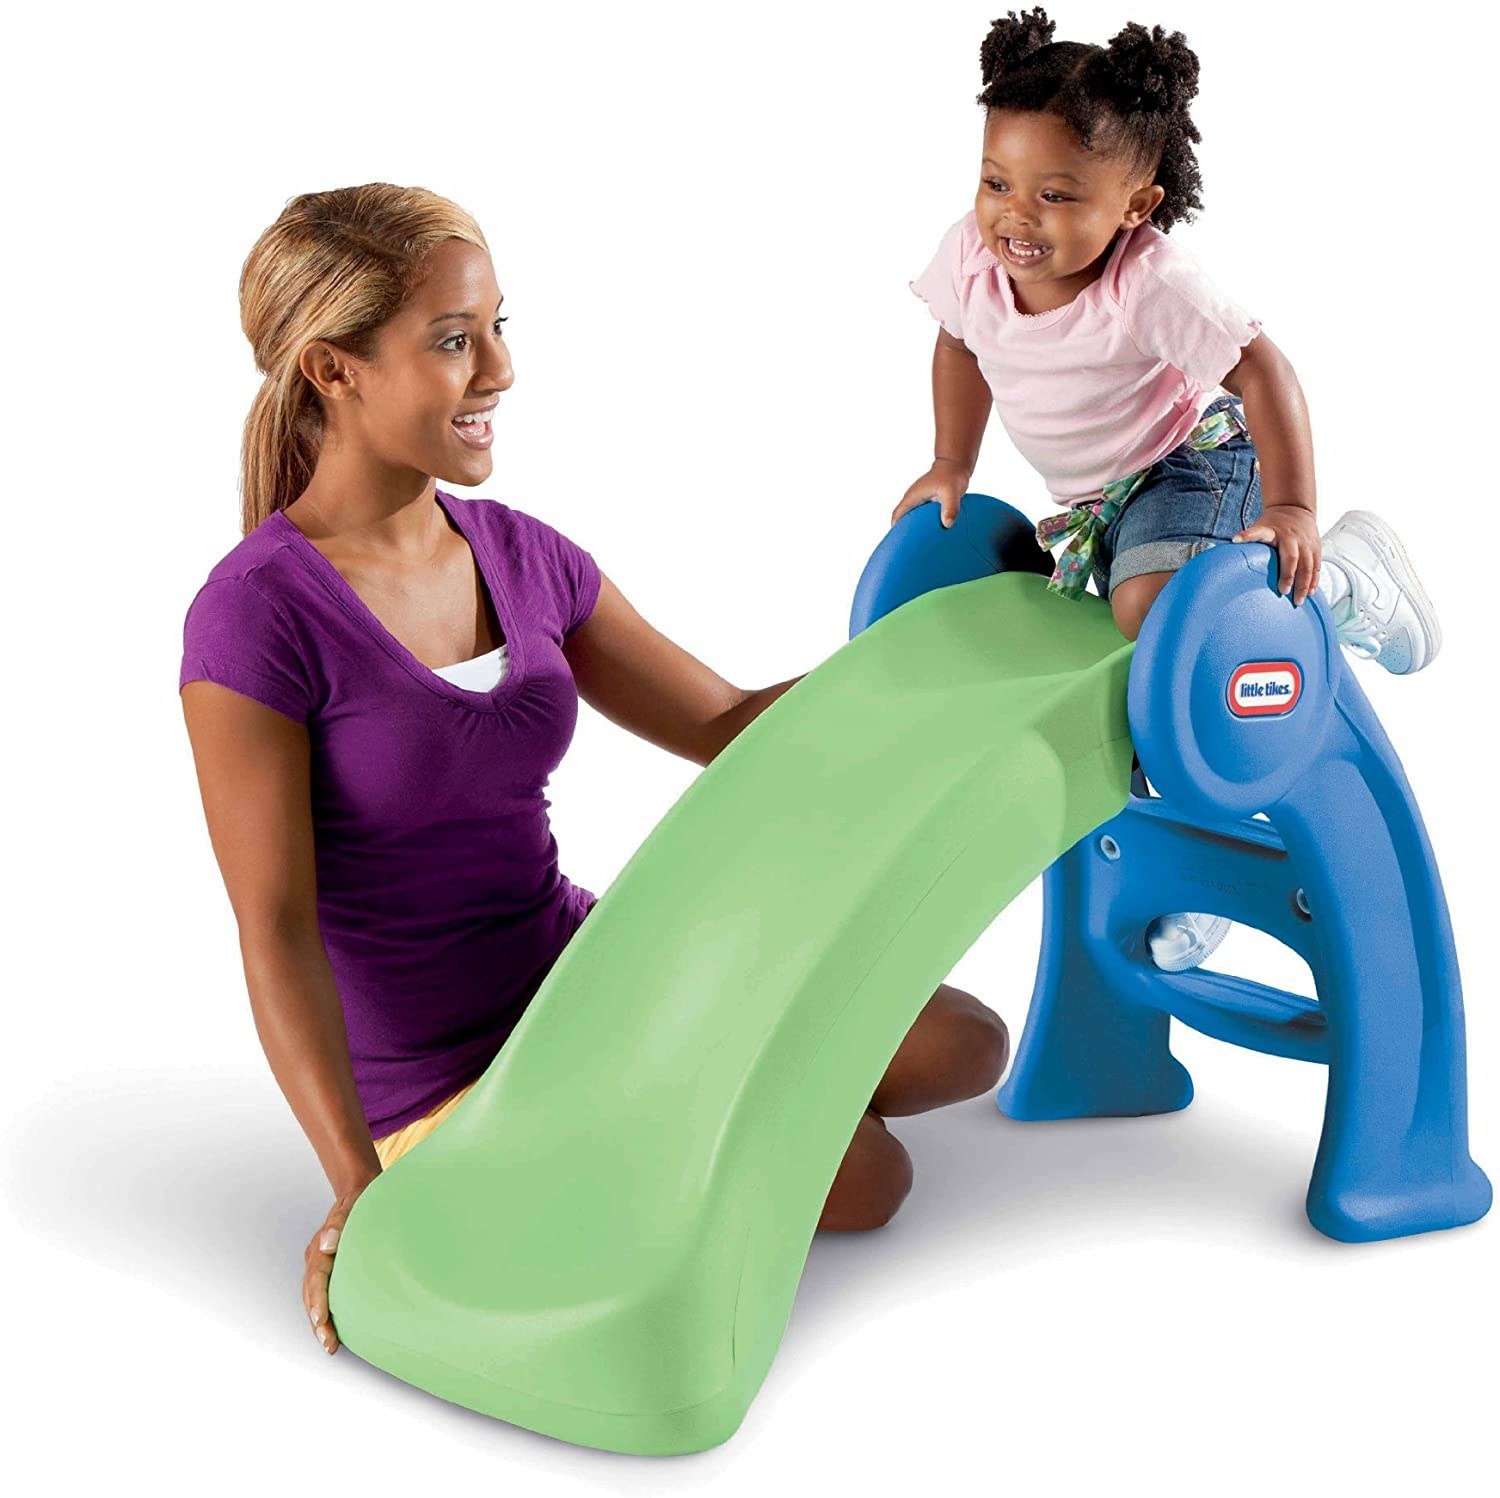 A parent watching a child play on a blue and green plastic slide